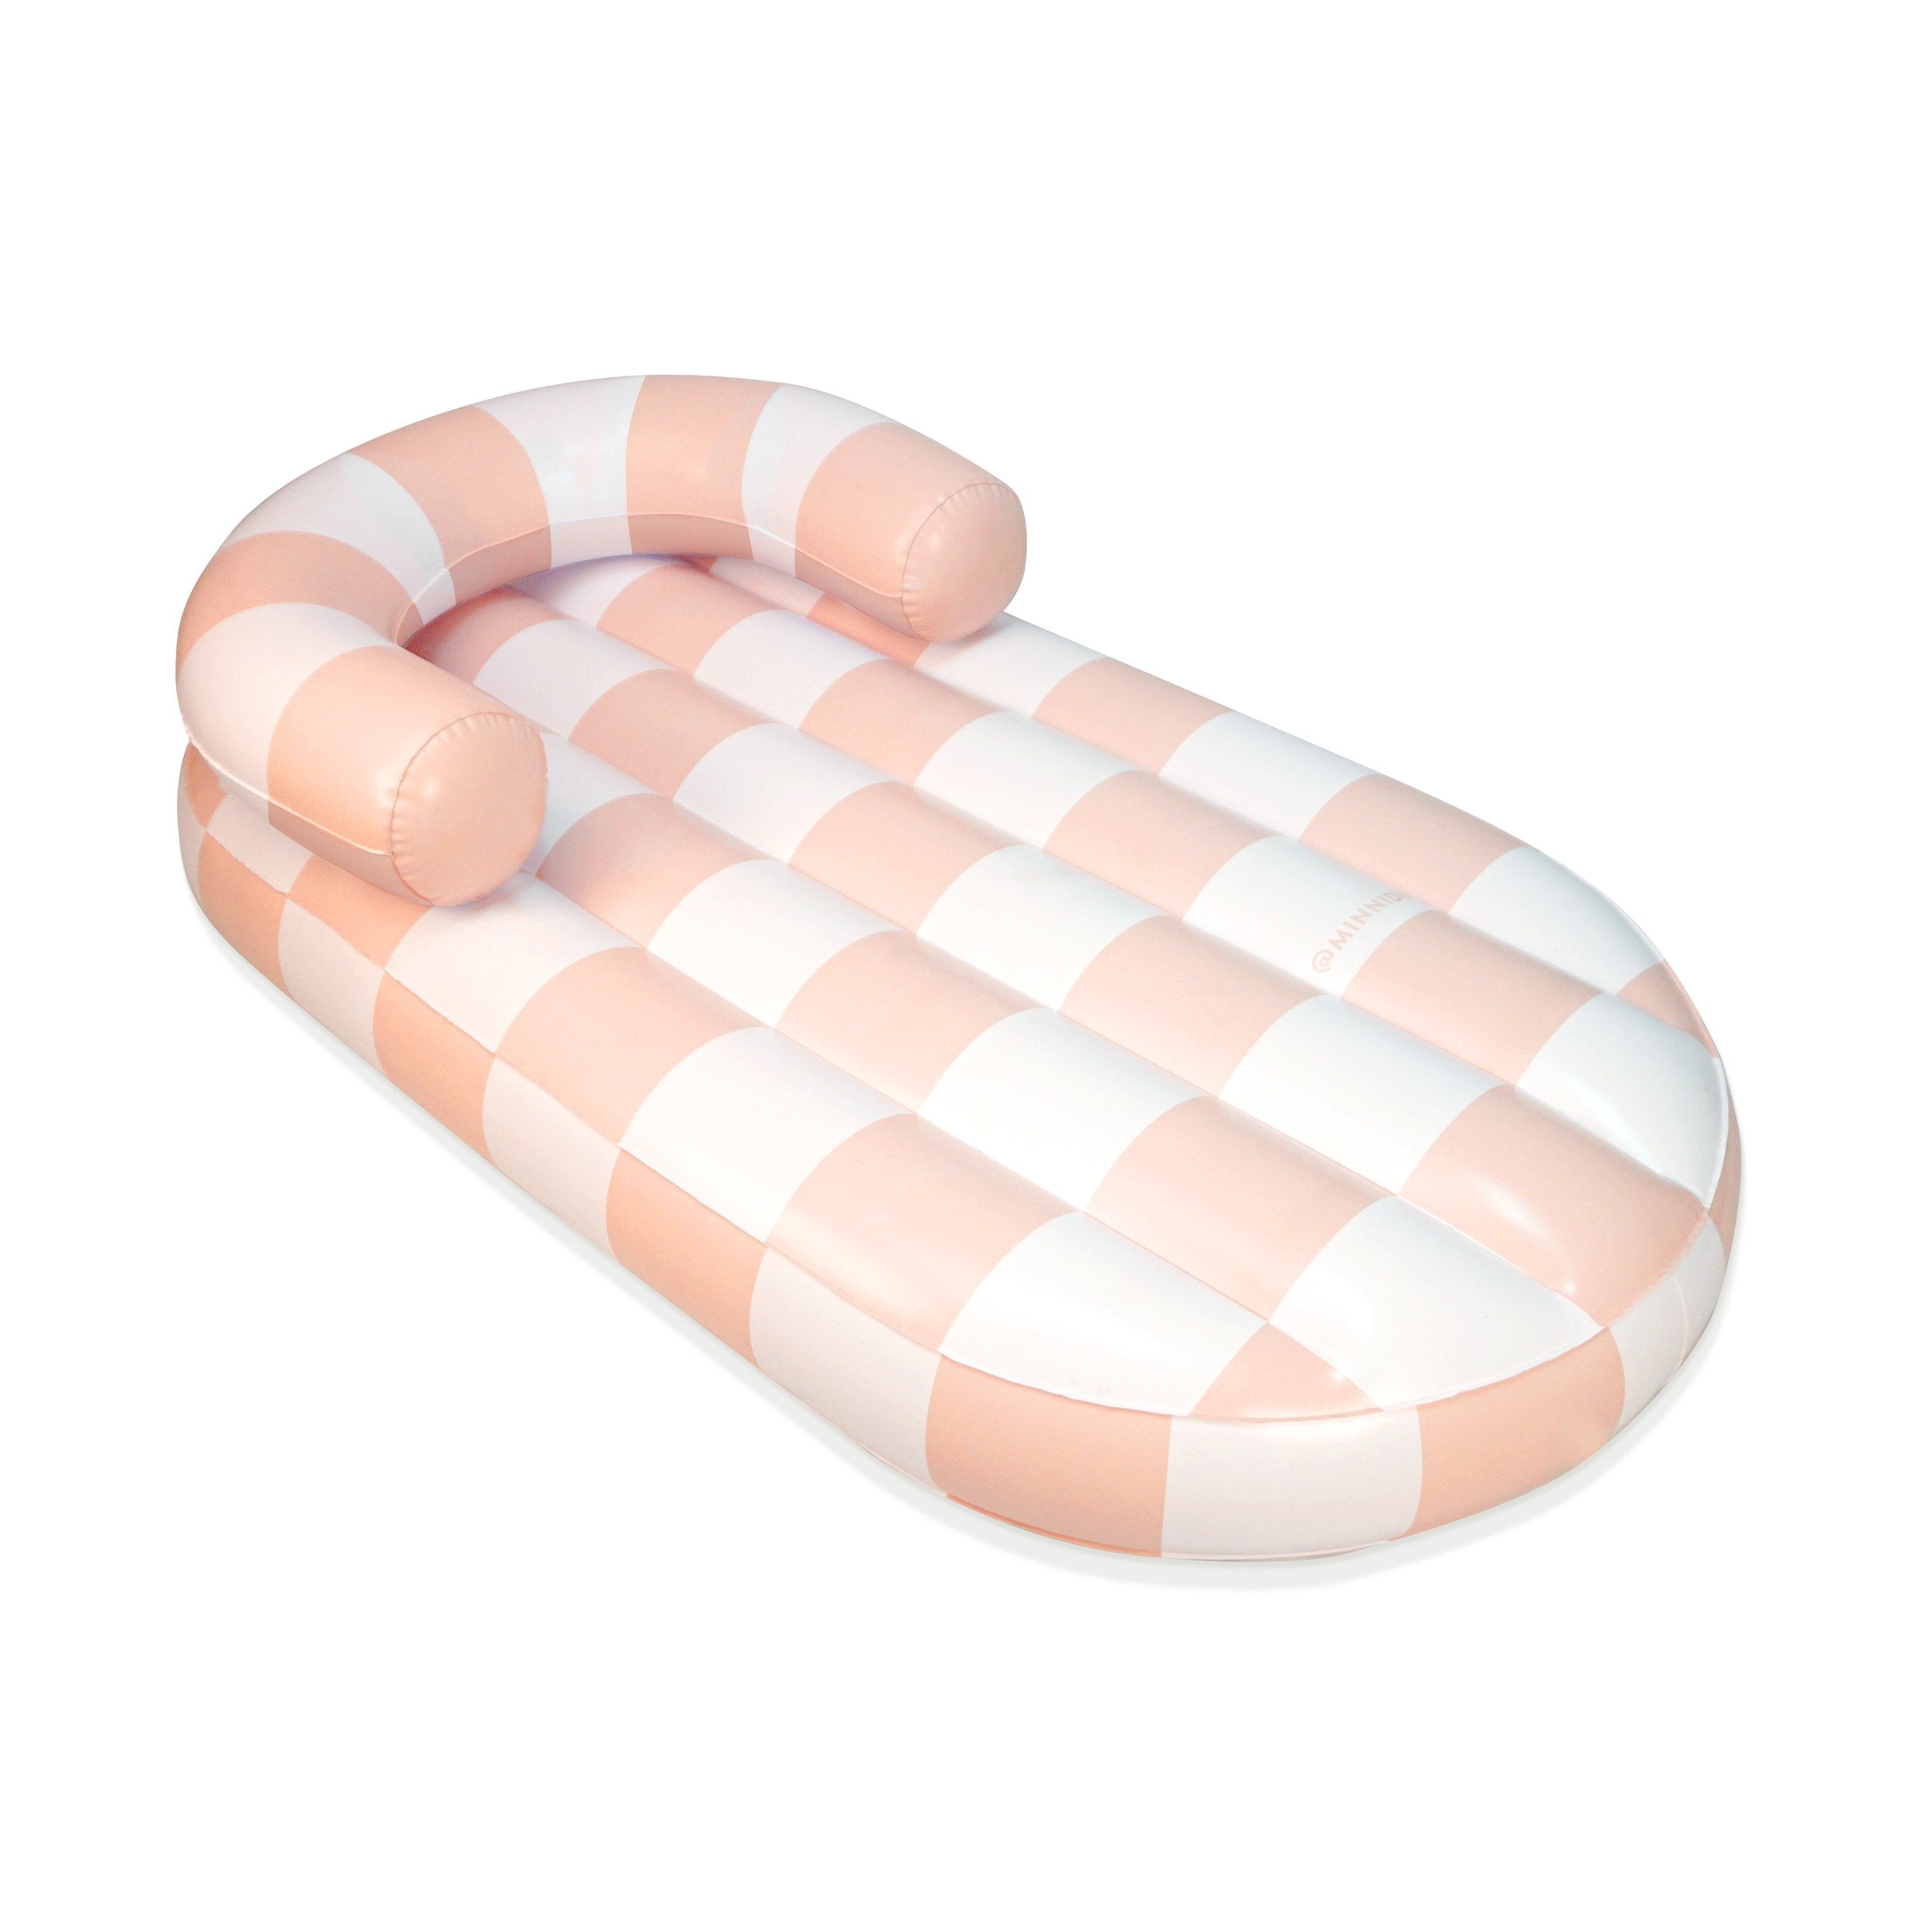 the ARCHED CHECKER Luxe Inflatable Chaise Lounger